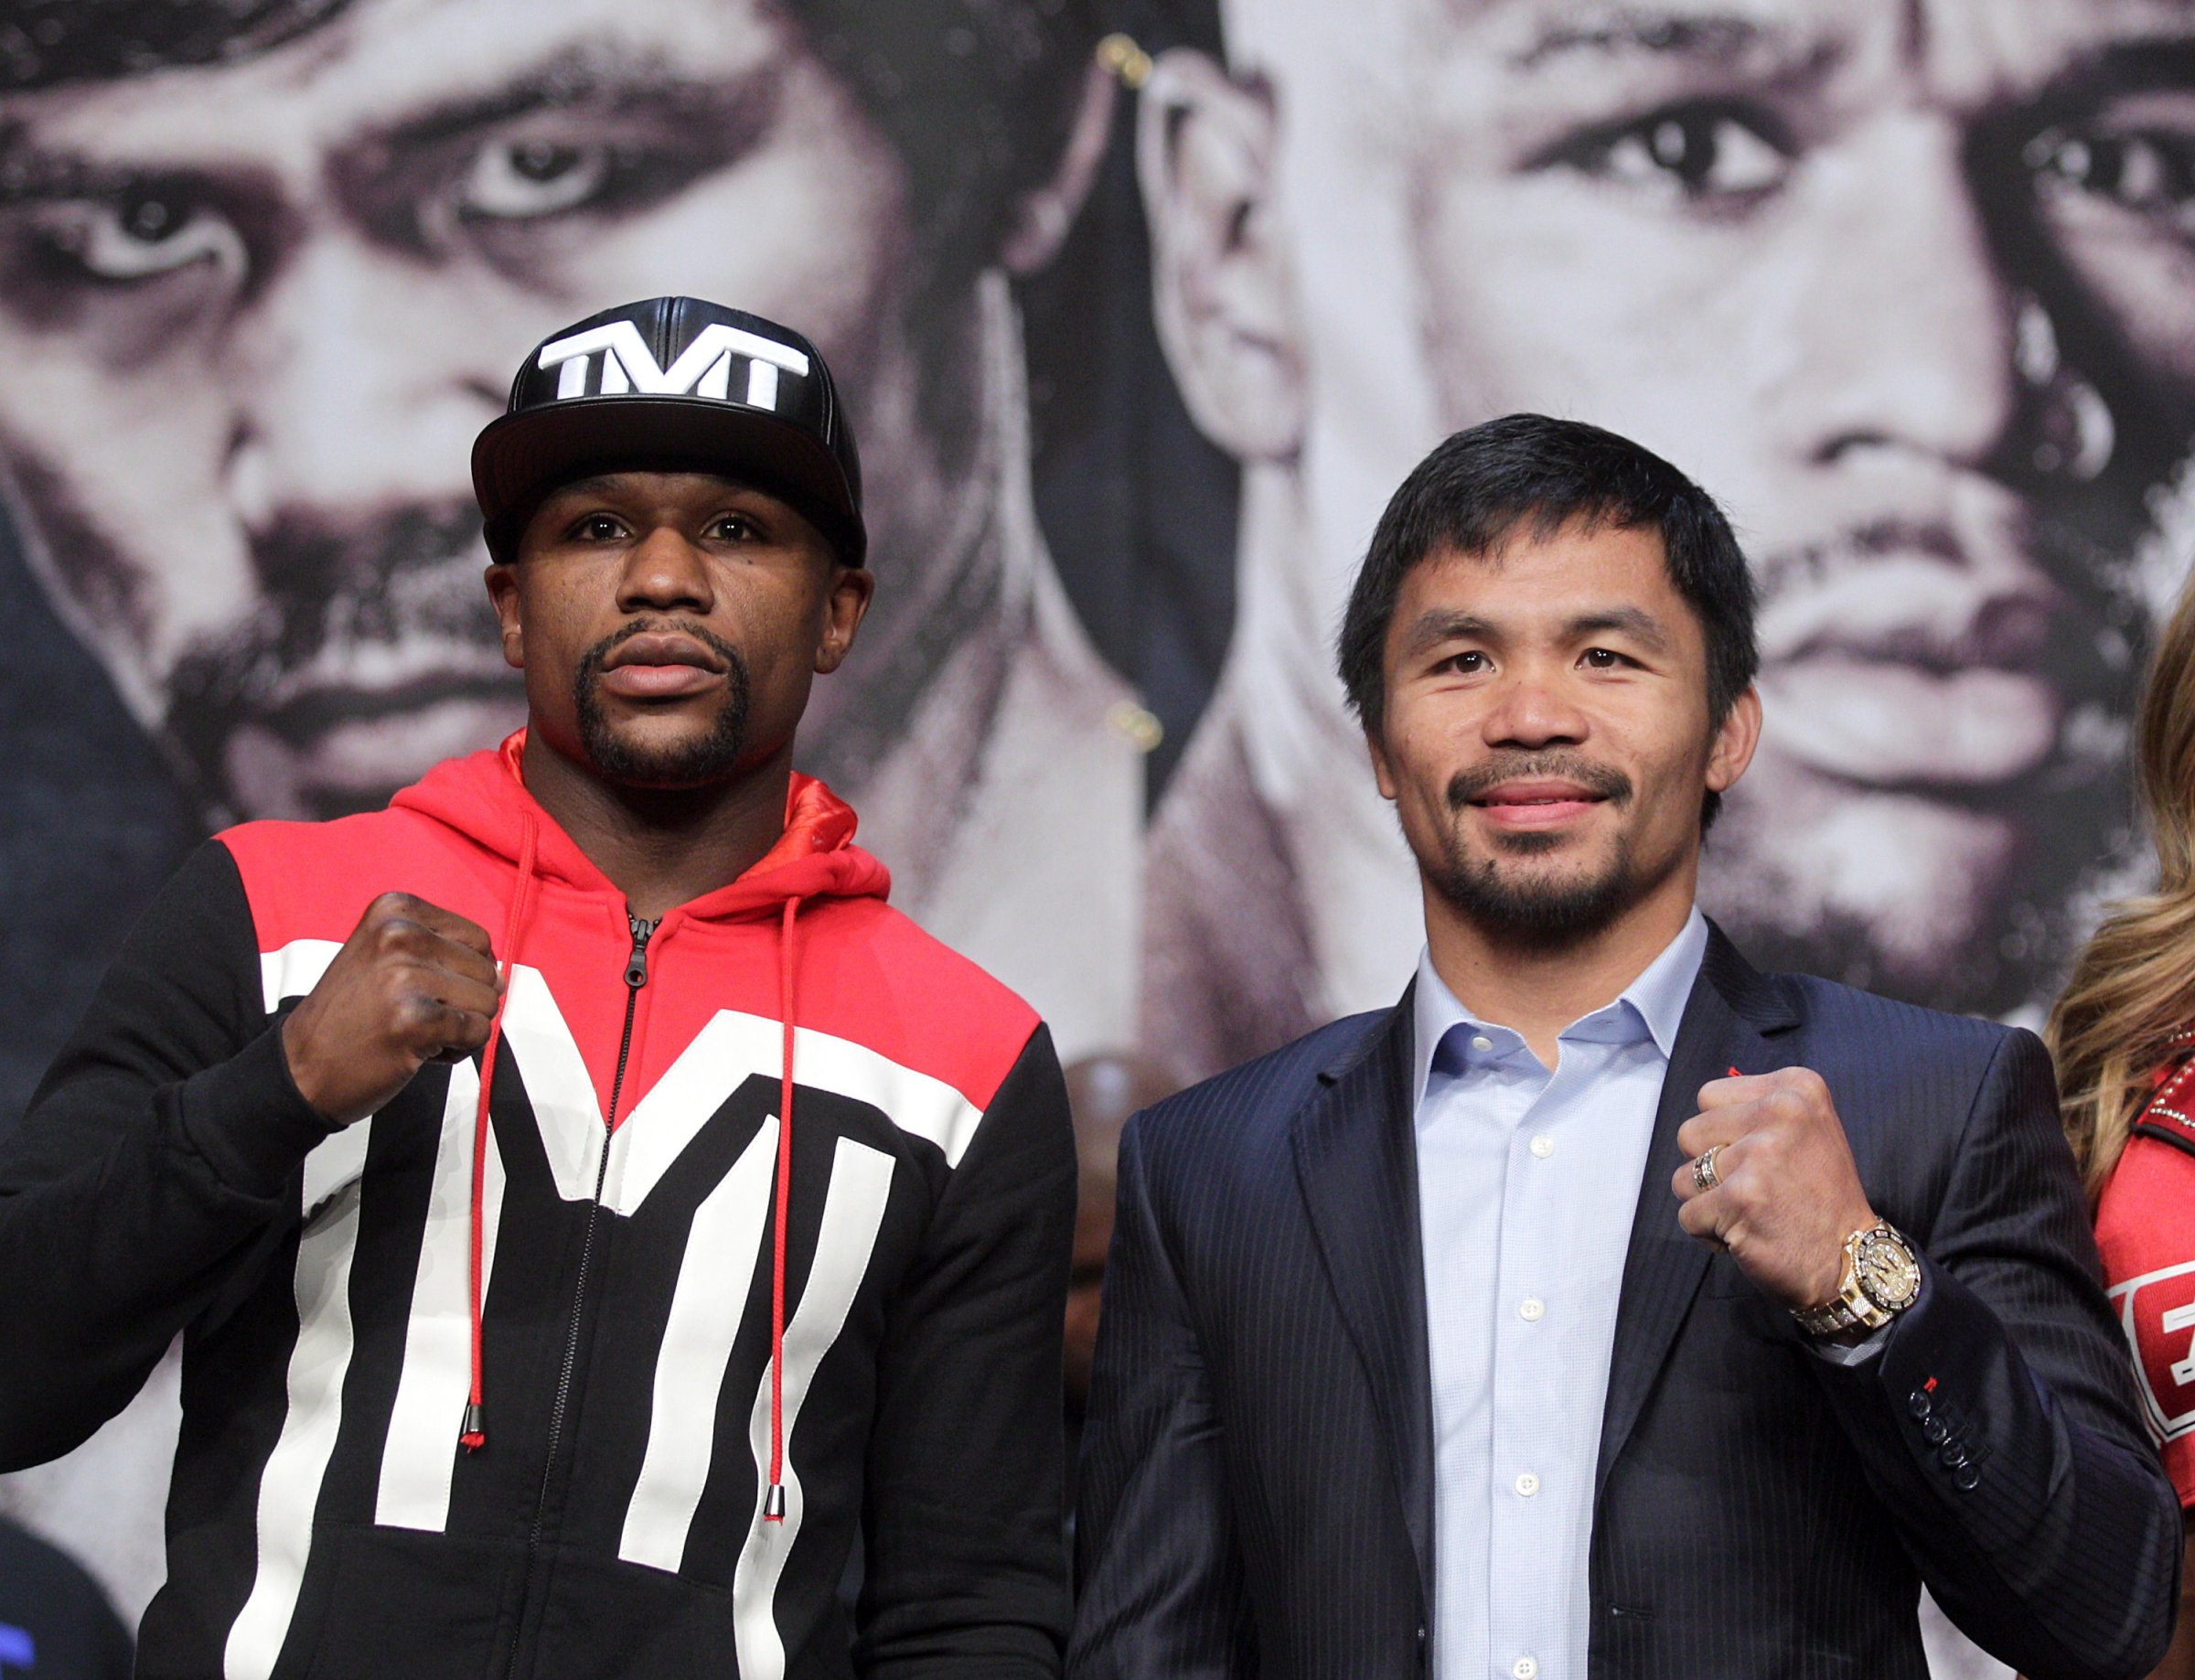 Enjoy it now, guys: Mayweather (left) and Pacquiao are heading for a brain pounding